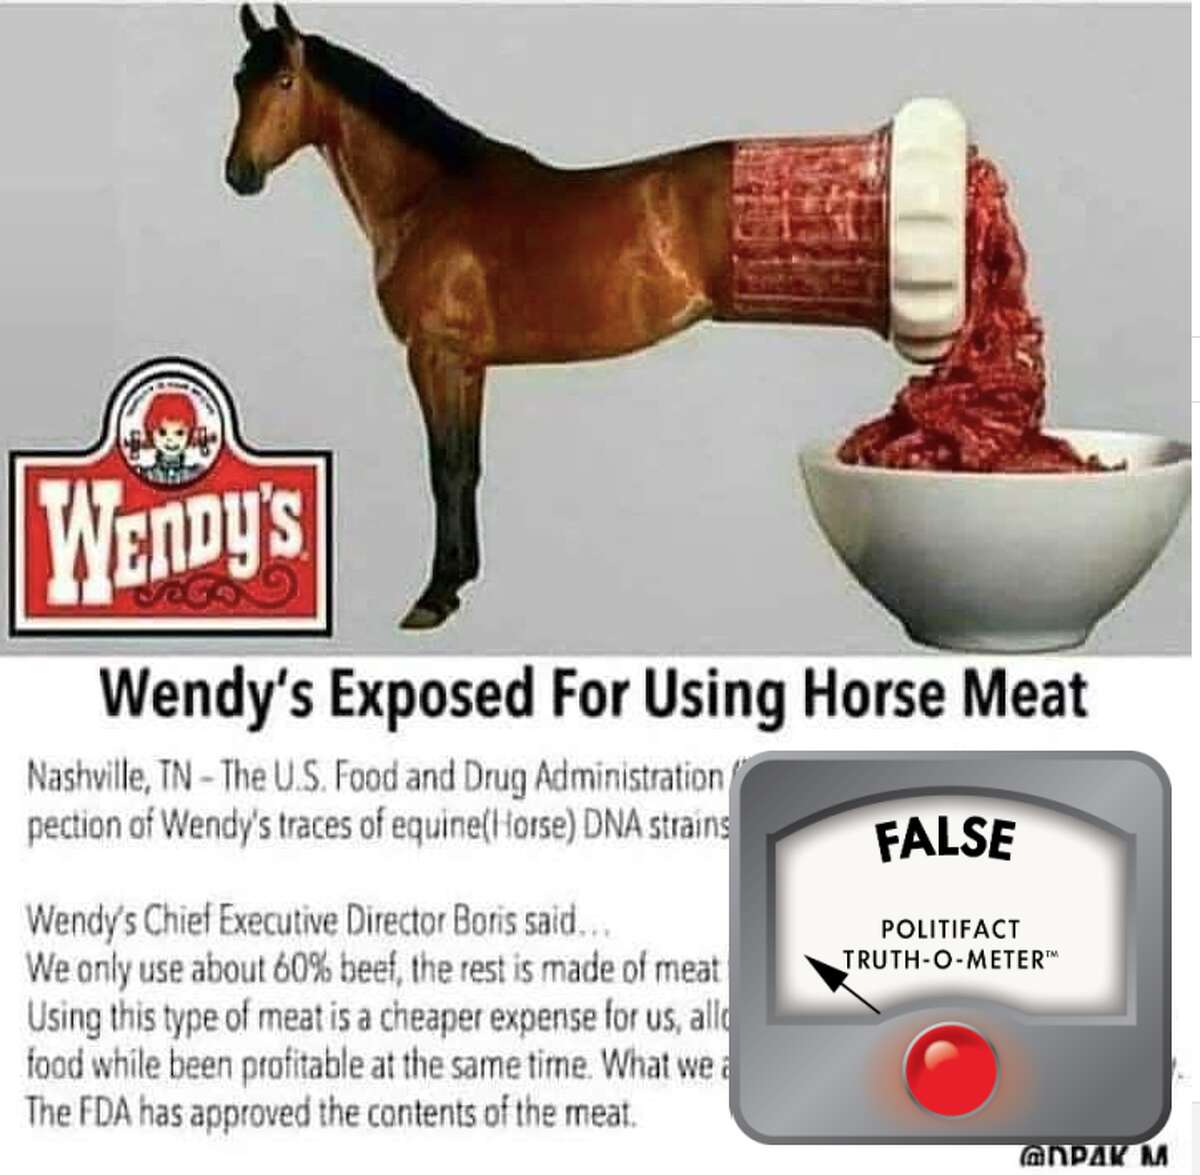 This false image about horsemeat at Wendy's has been debunked in years prior.